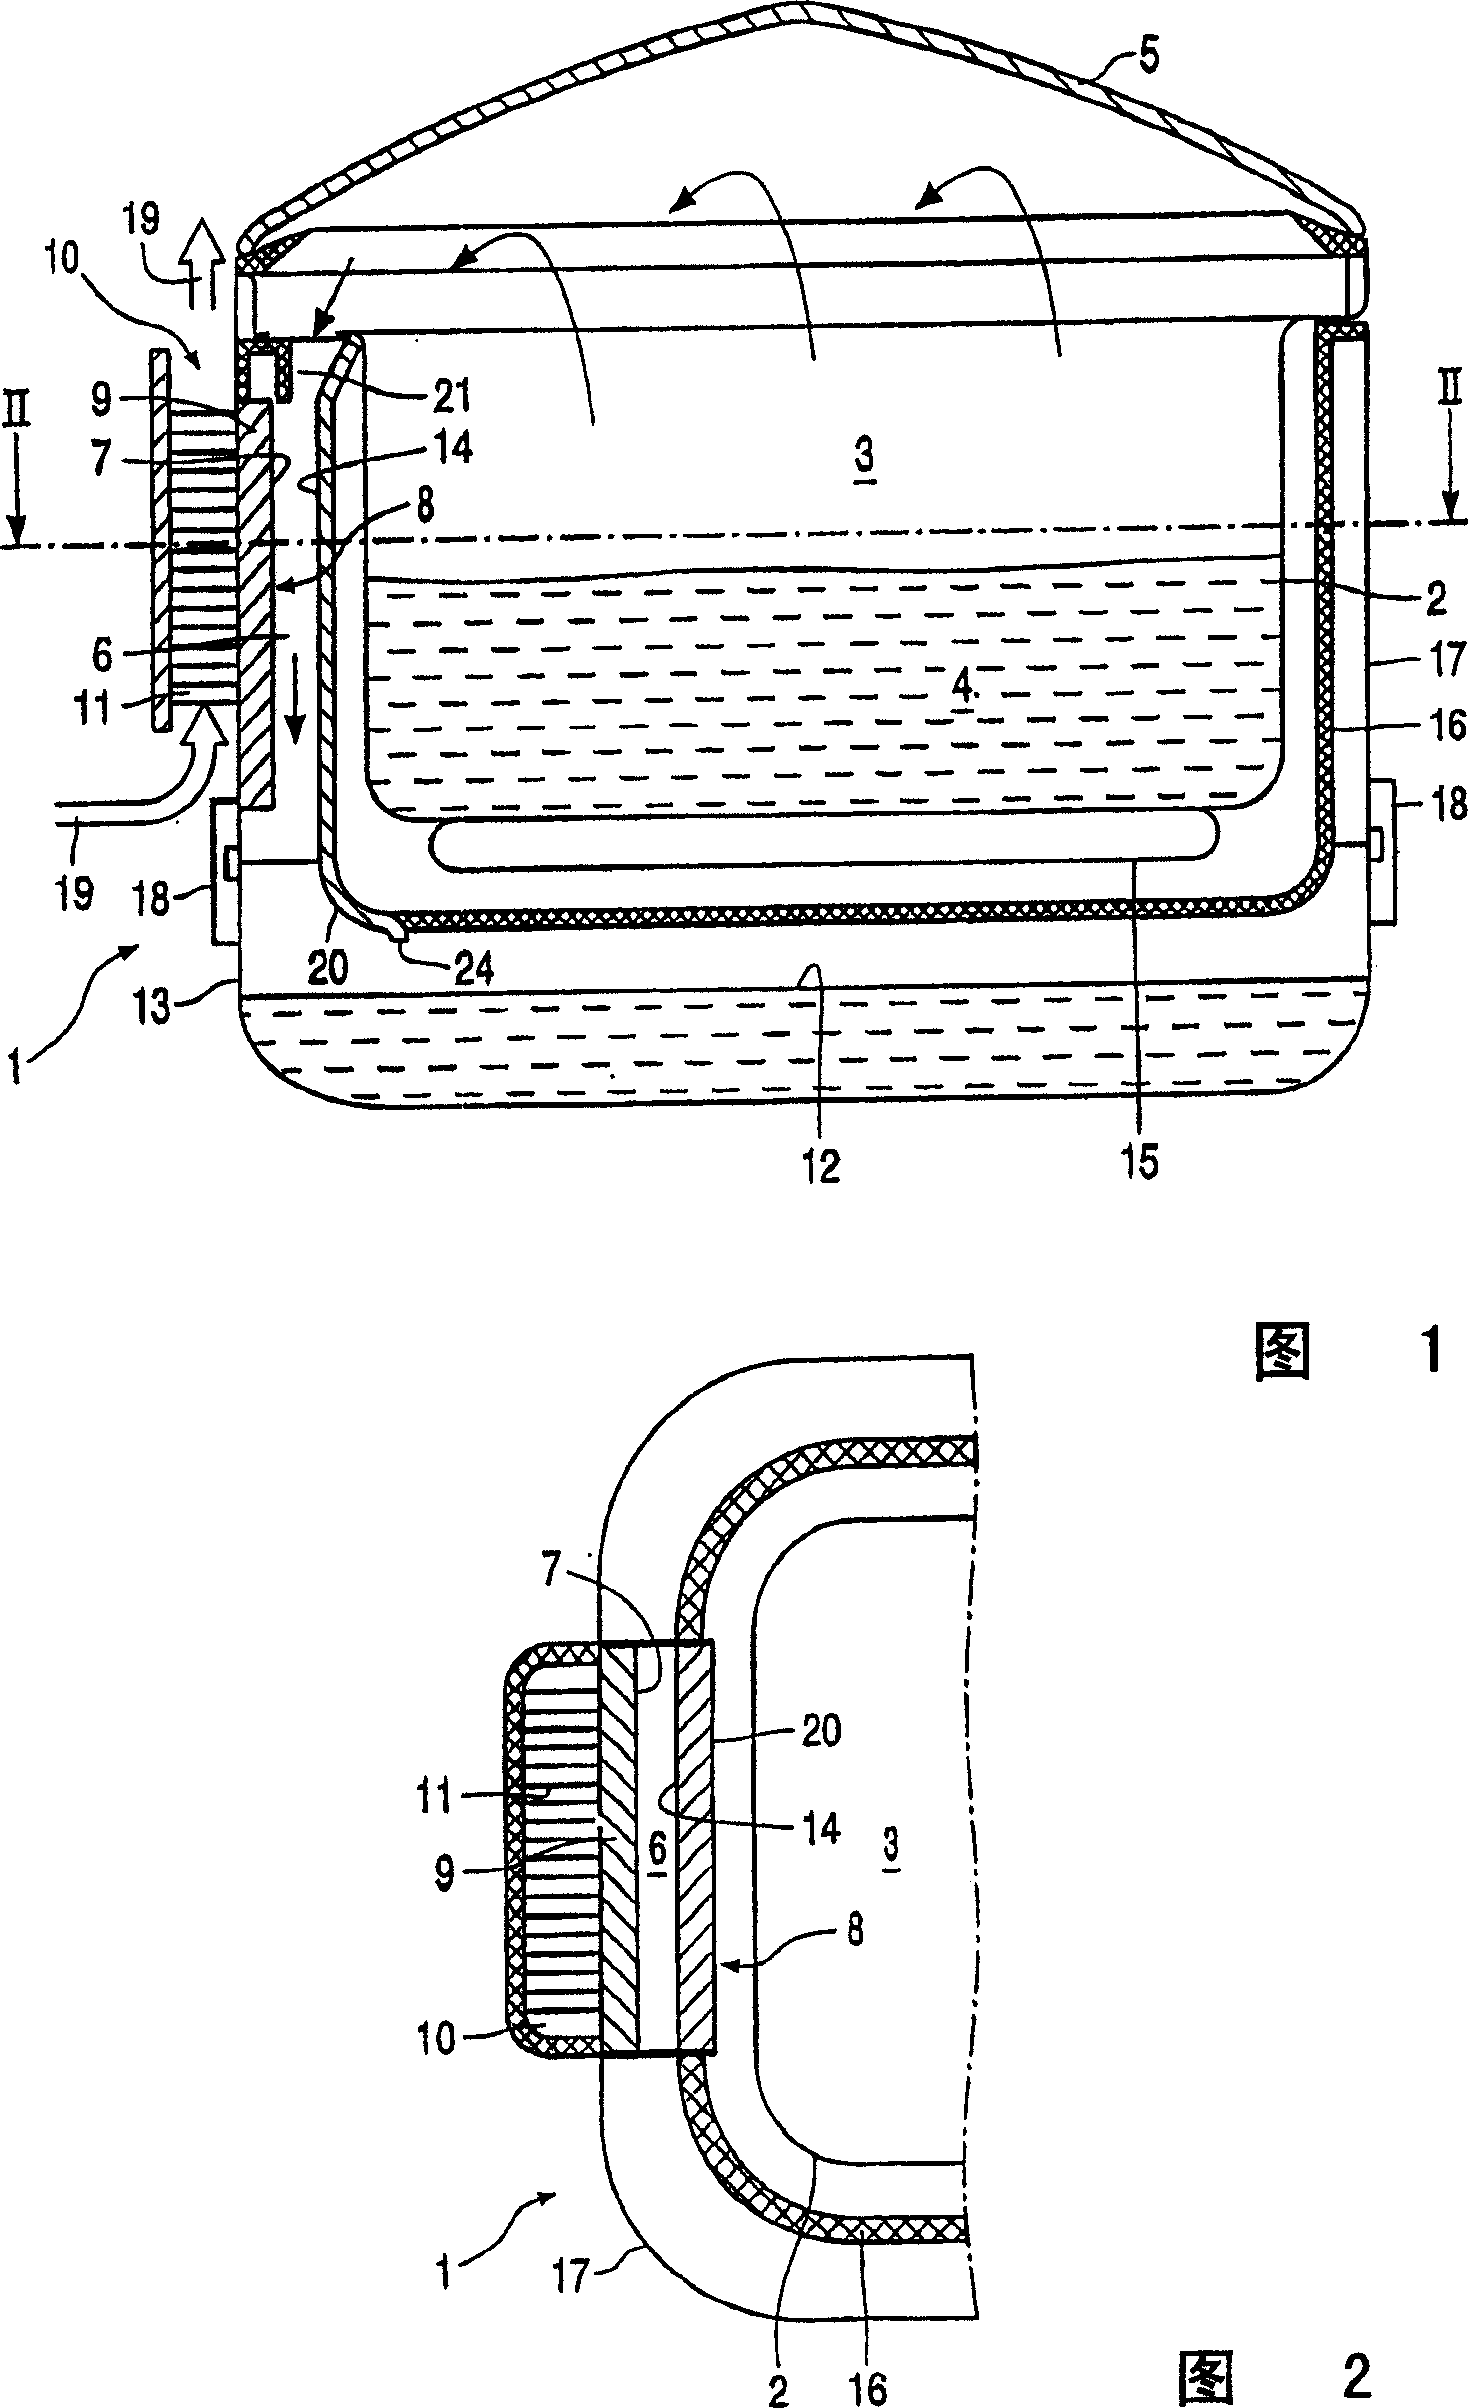 Apparatus for deep-frying food comprising reservoir for collecting condensate from vapour being discharged during deep-frying process